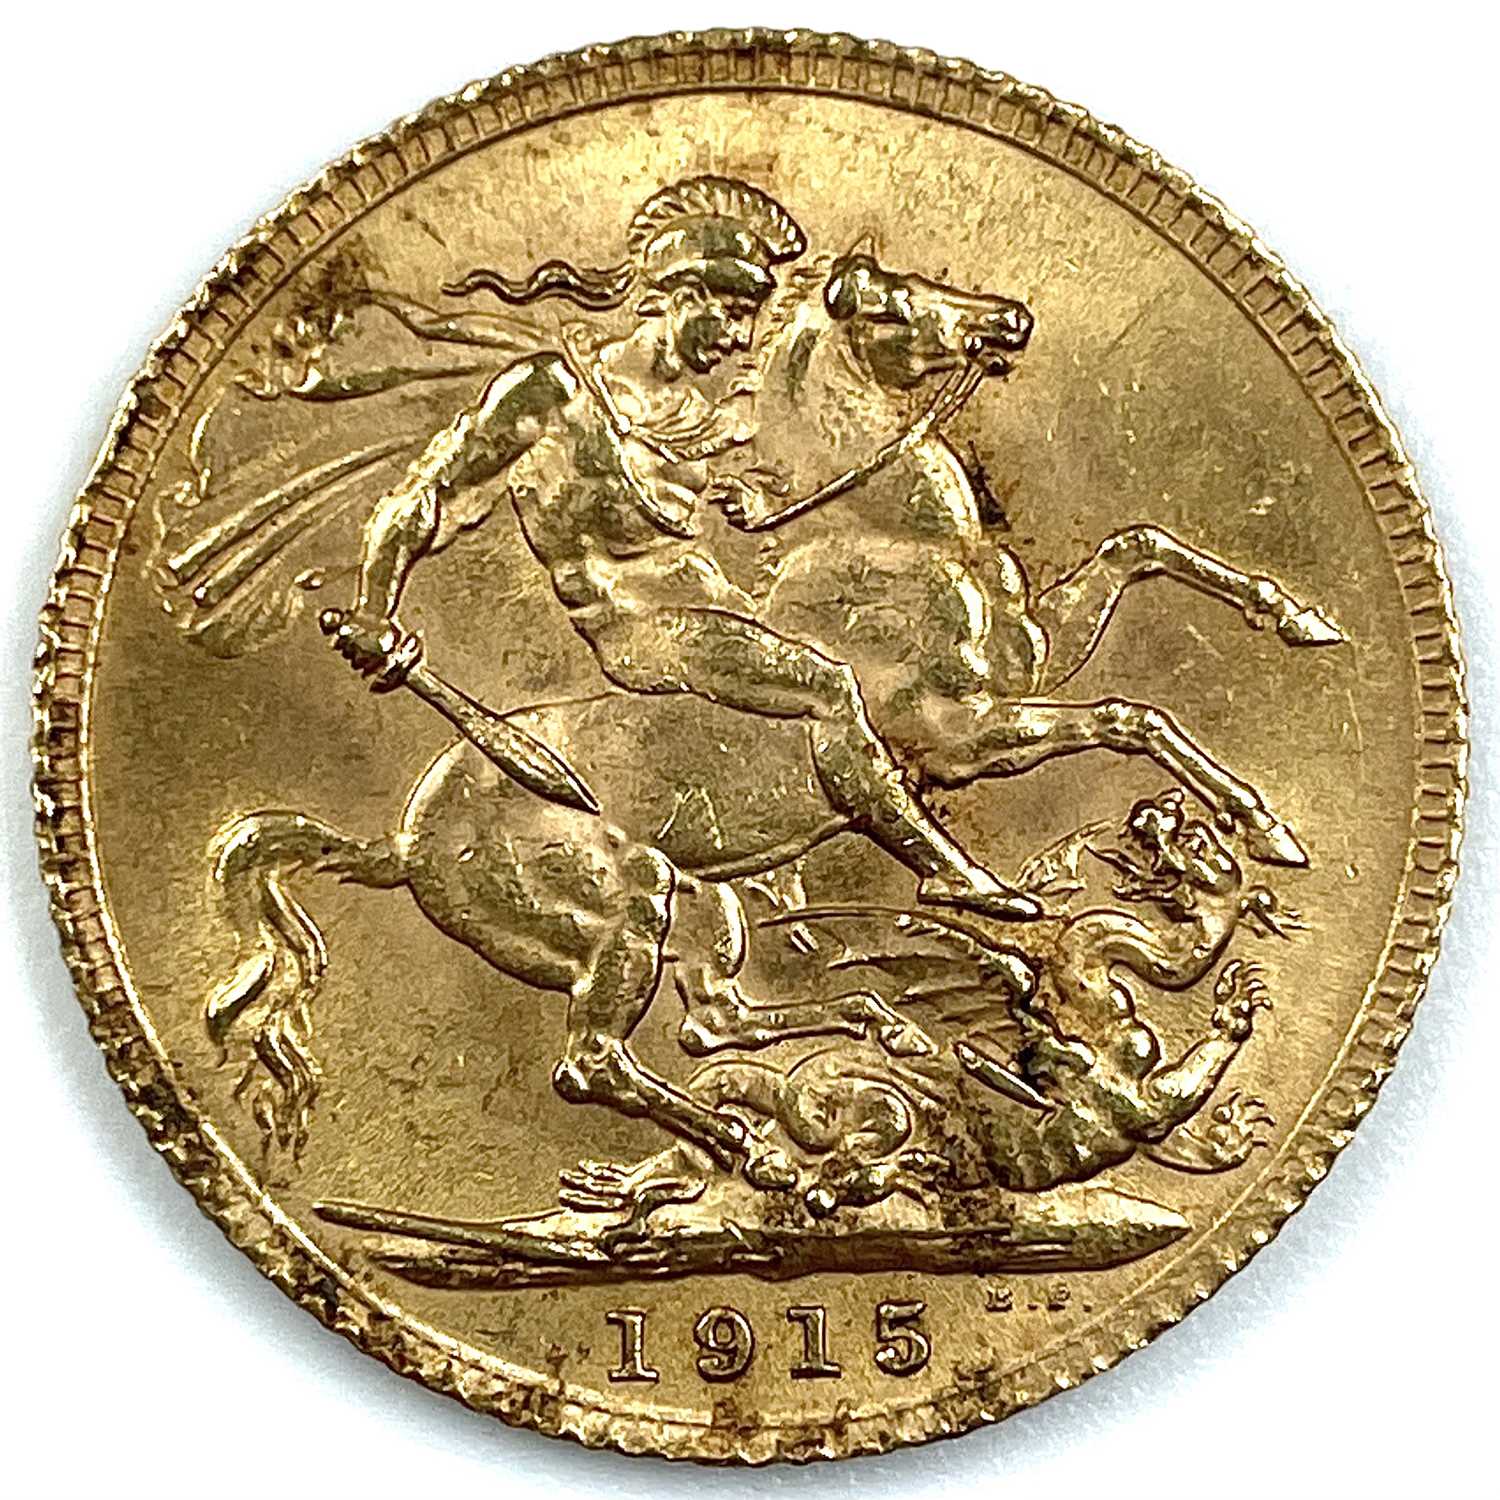 Lot 69 - A George V 1915 full gold sovereign coin.